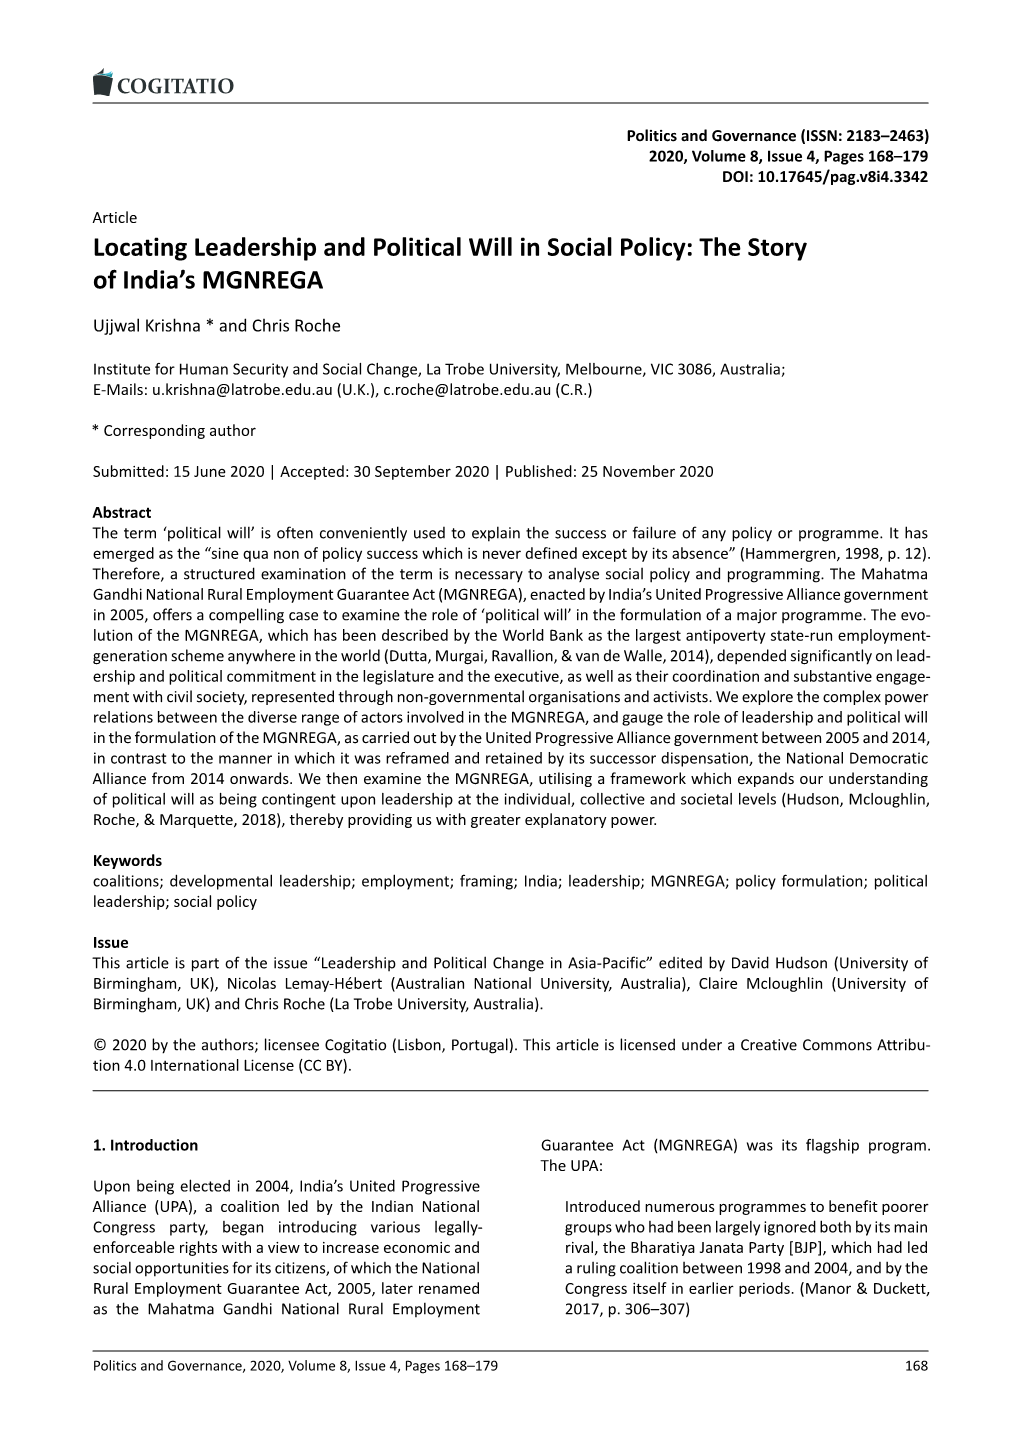 Locating Leadership and Political Will in Social Policy: the Story of India's